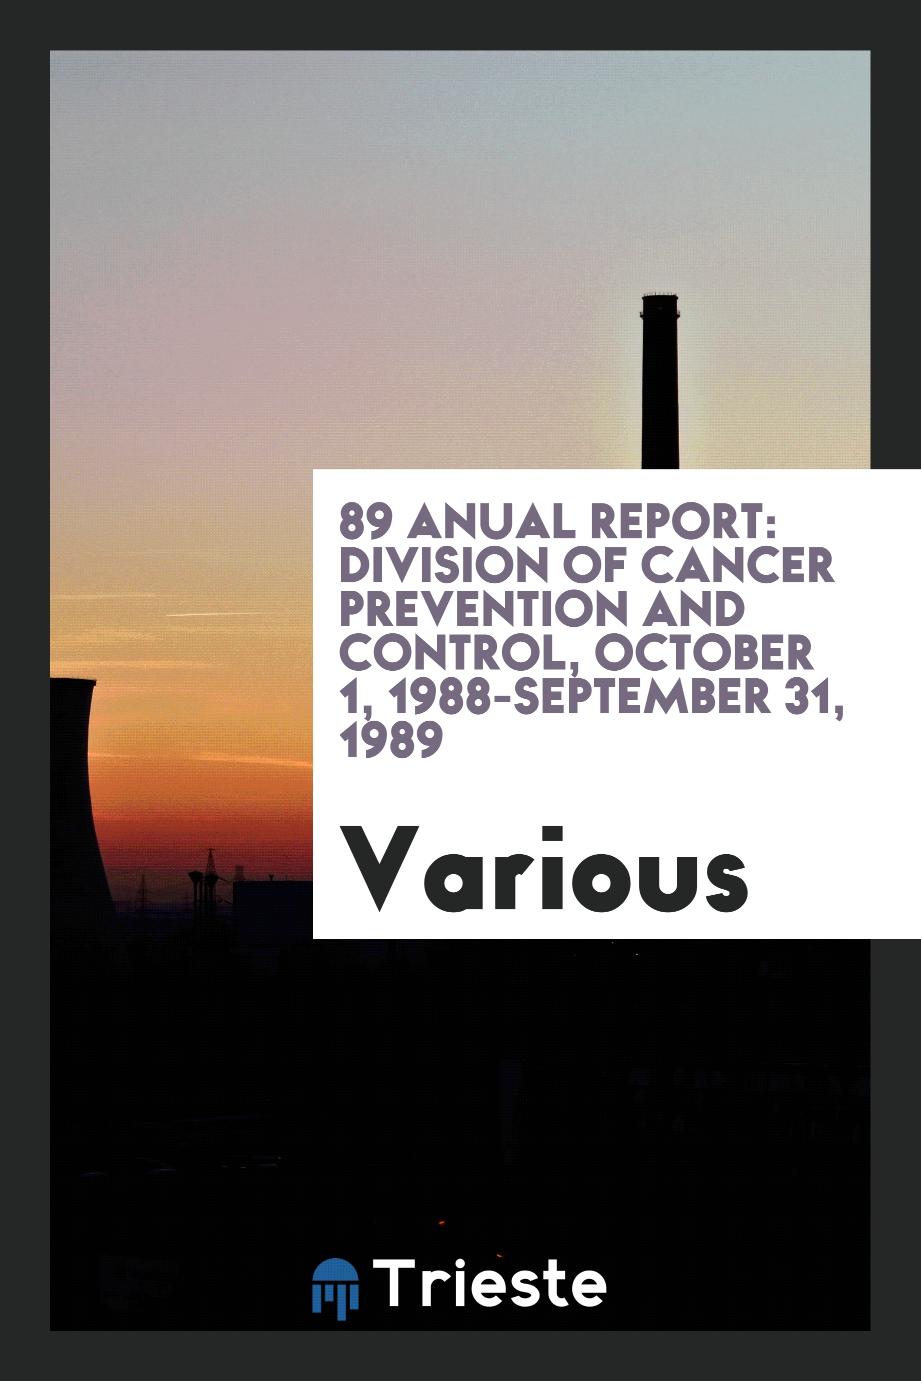 89 Anual Report: Division Of Cancer Prevention and Control, October 1, 1988-September 31, 1989